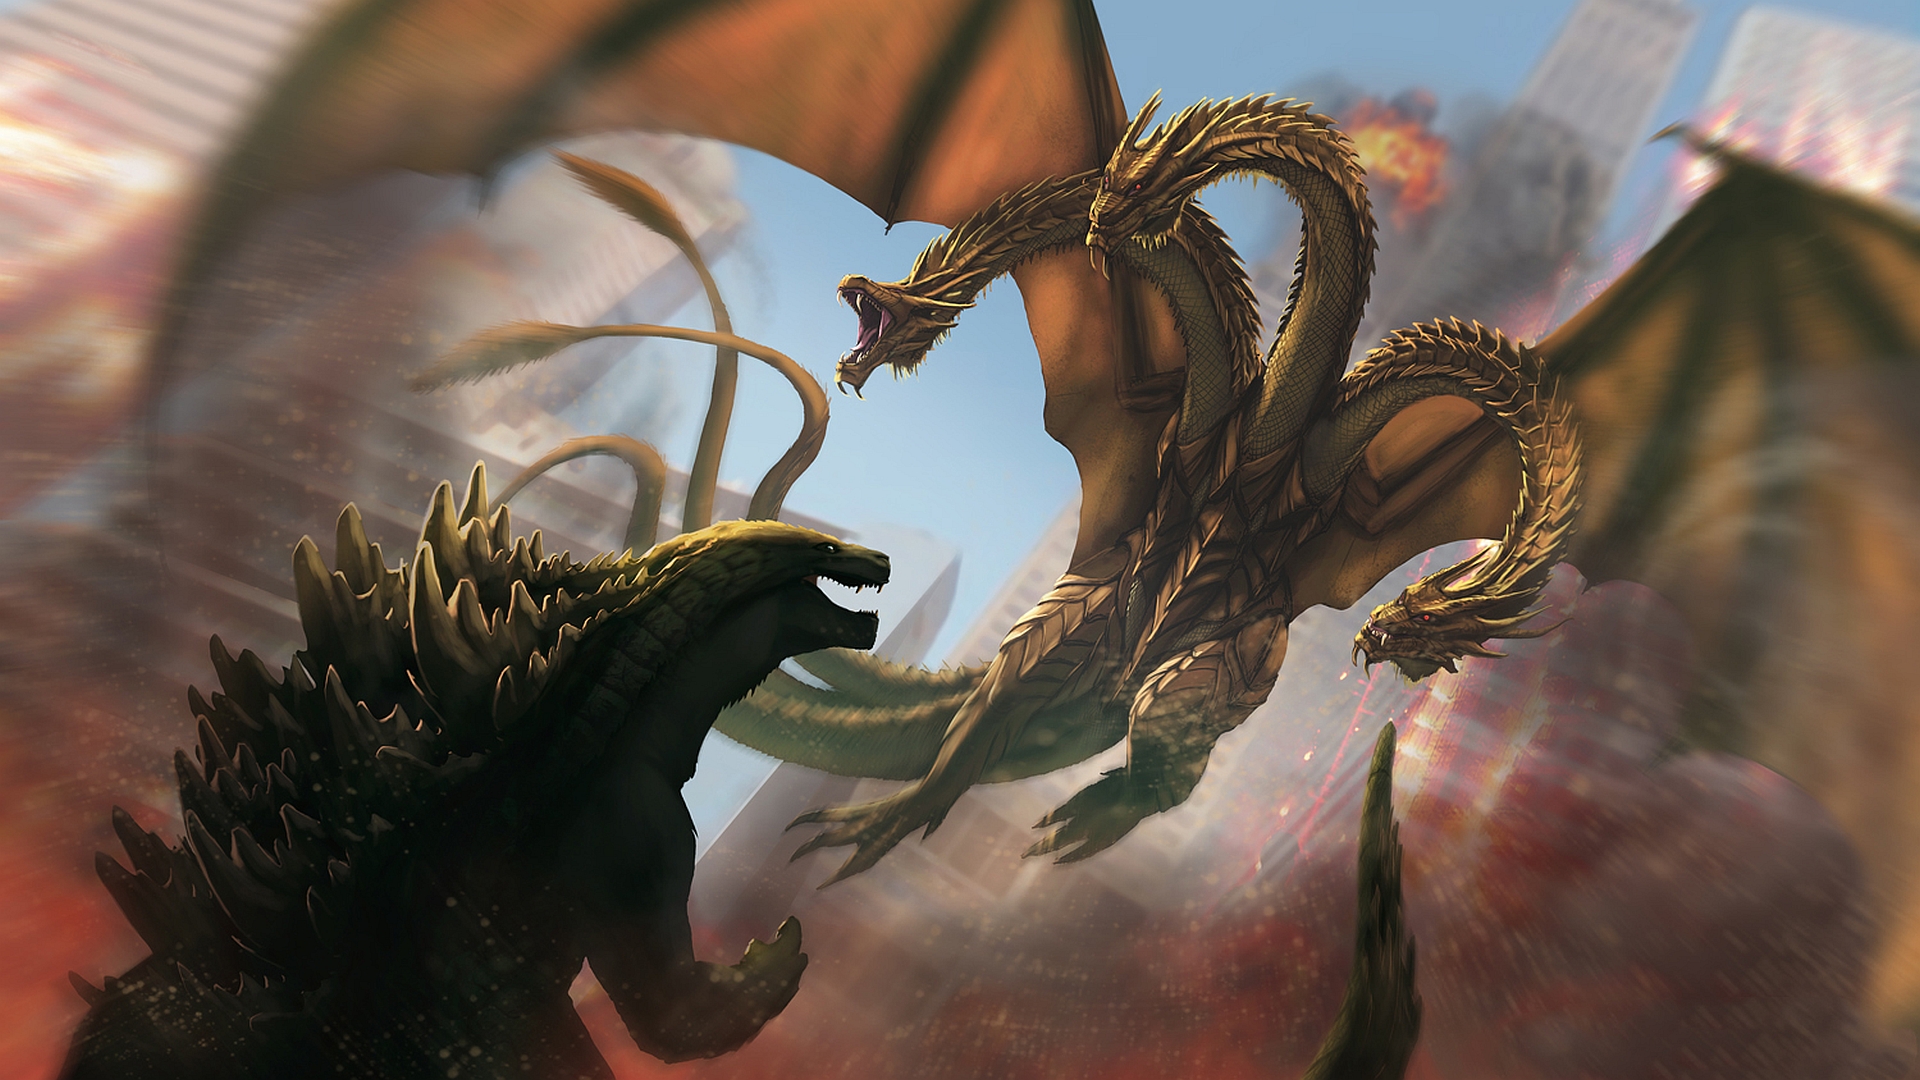 King Ghidorah HD Wallpaper And Background